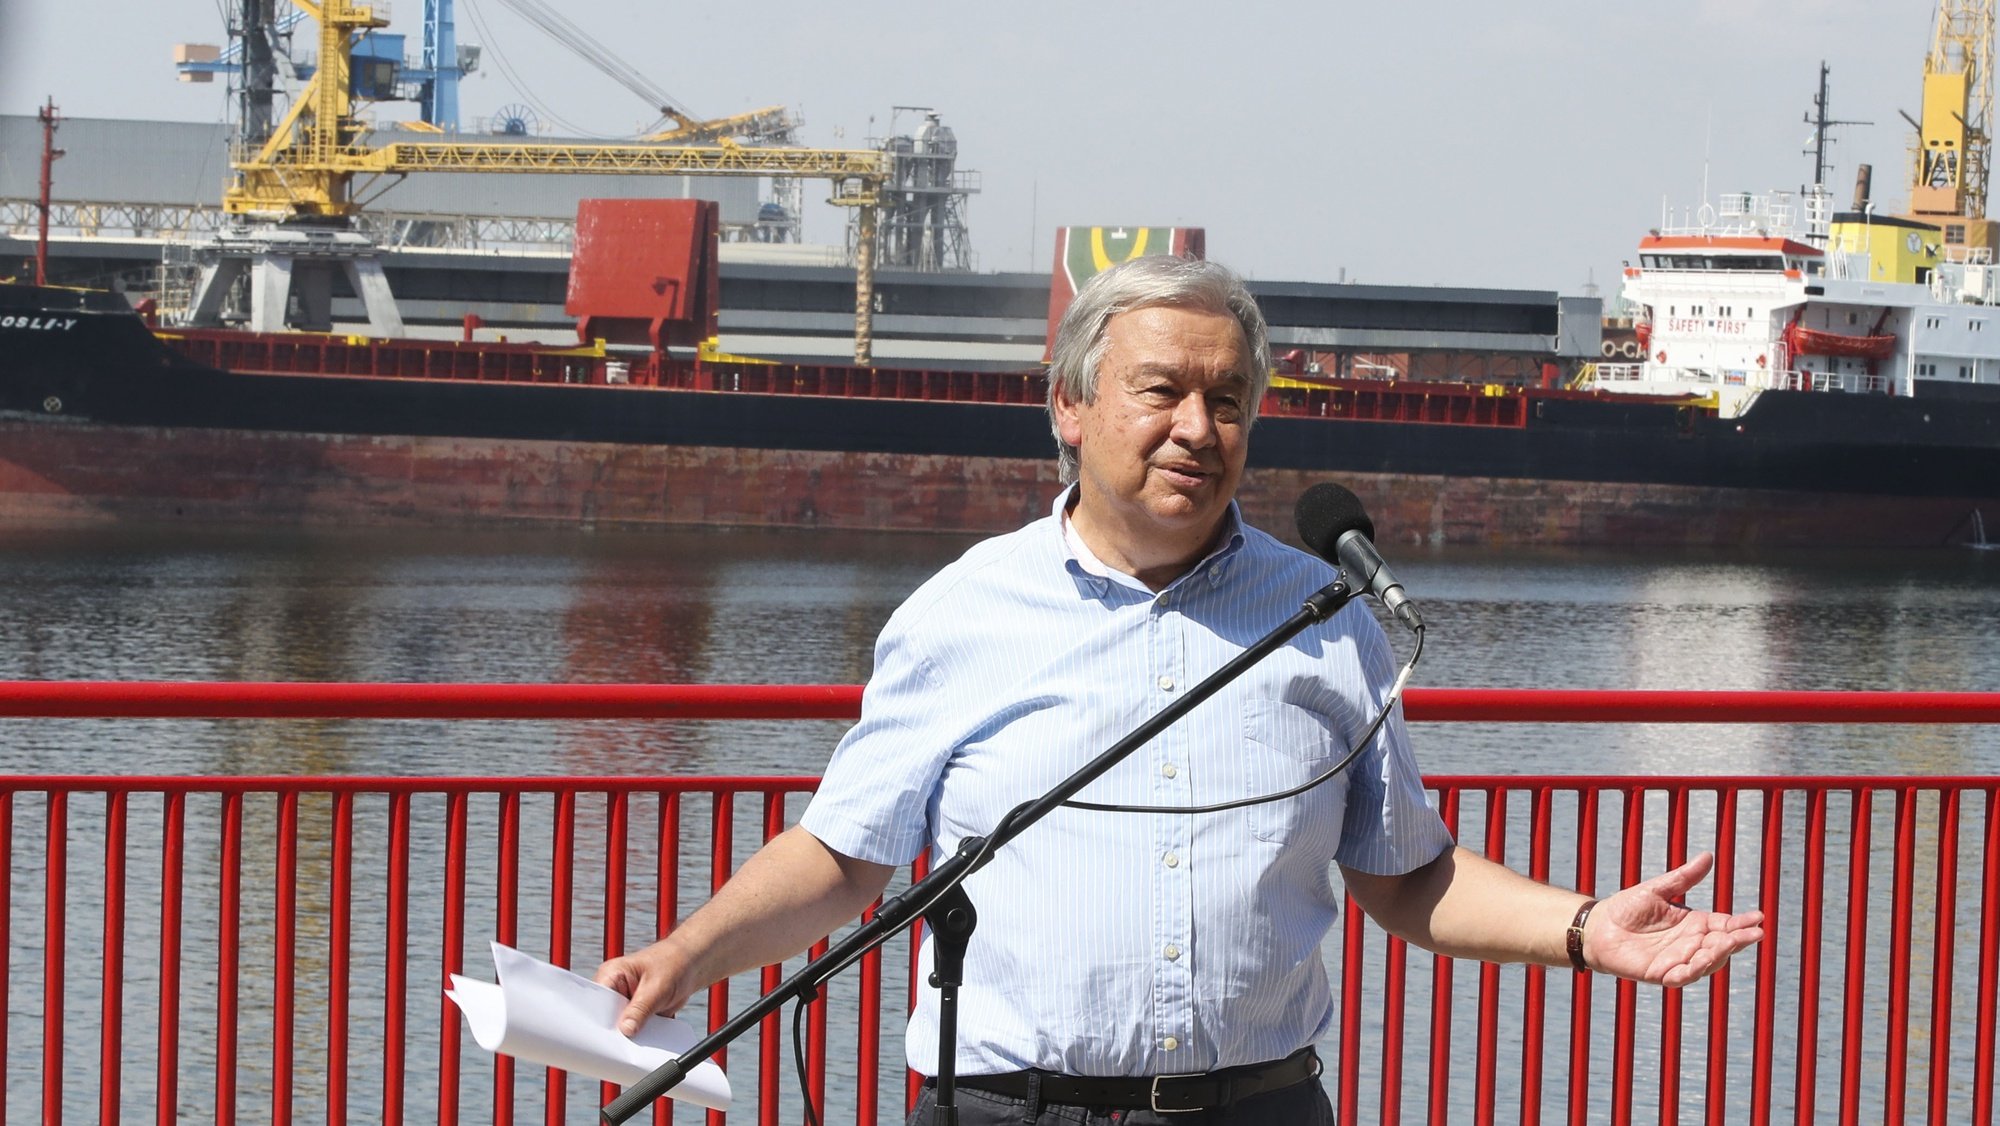 United Nations (UN) Secretary-General Antonio Guterres speaks to journalists at the end of his visit to the Odessa grain port at the end of a two-day stay in Ukraine, in Odessa, Ukraine, 19 August 2022. The port of Odessa is being used for the export of Ukrainian grain through the Ukraine-Russia agreement promoted by the UN and Turkey. MANUEL DE ALMEIDA/LUSA